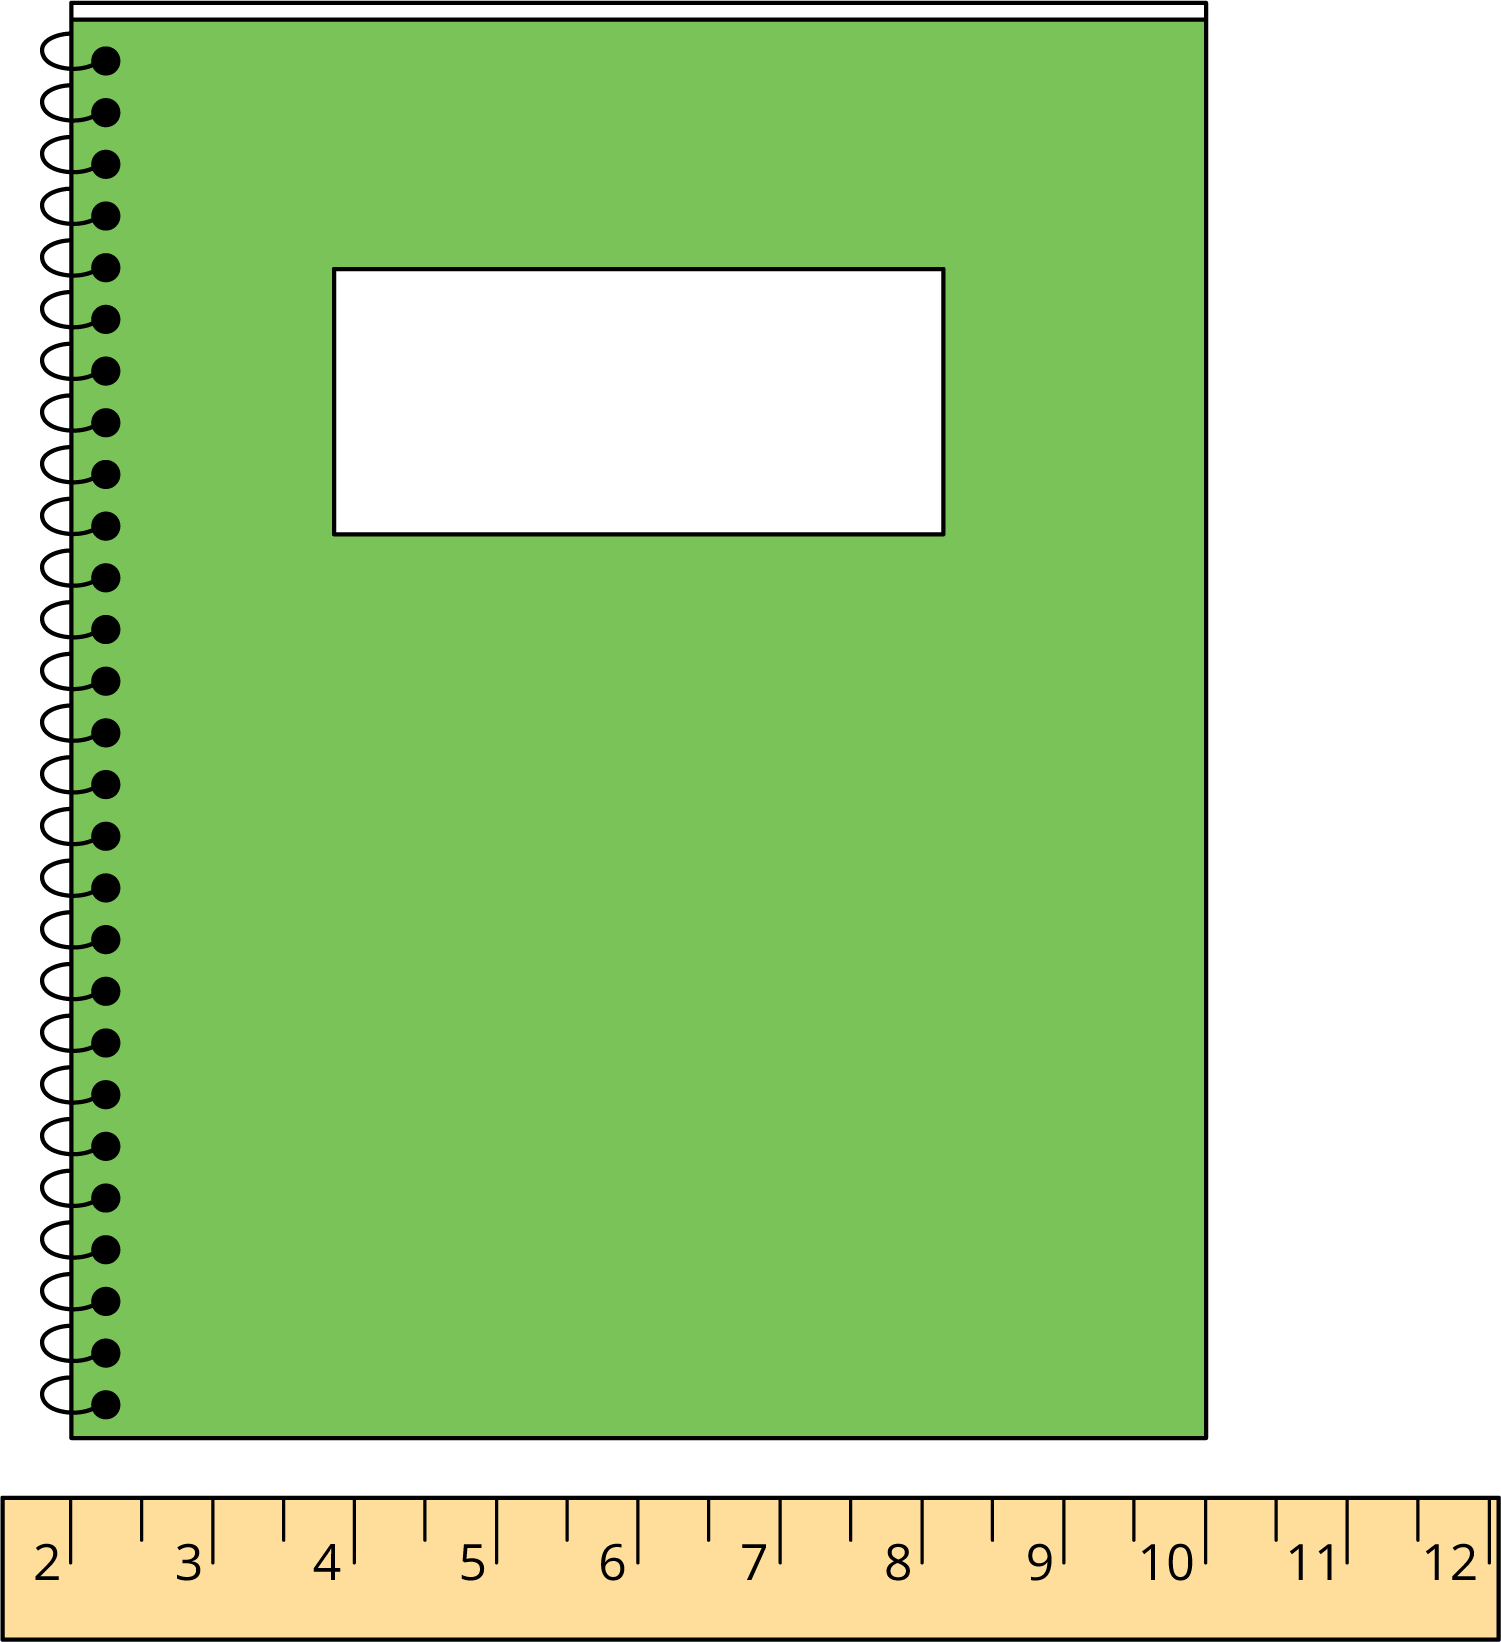 Ruler, from 2 to 12, by ones, measuring short side of a notebook. Notebook Side starts at 2, ends at 10.